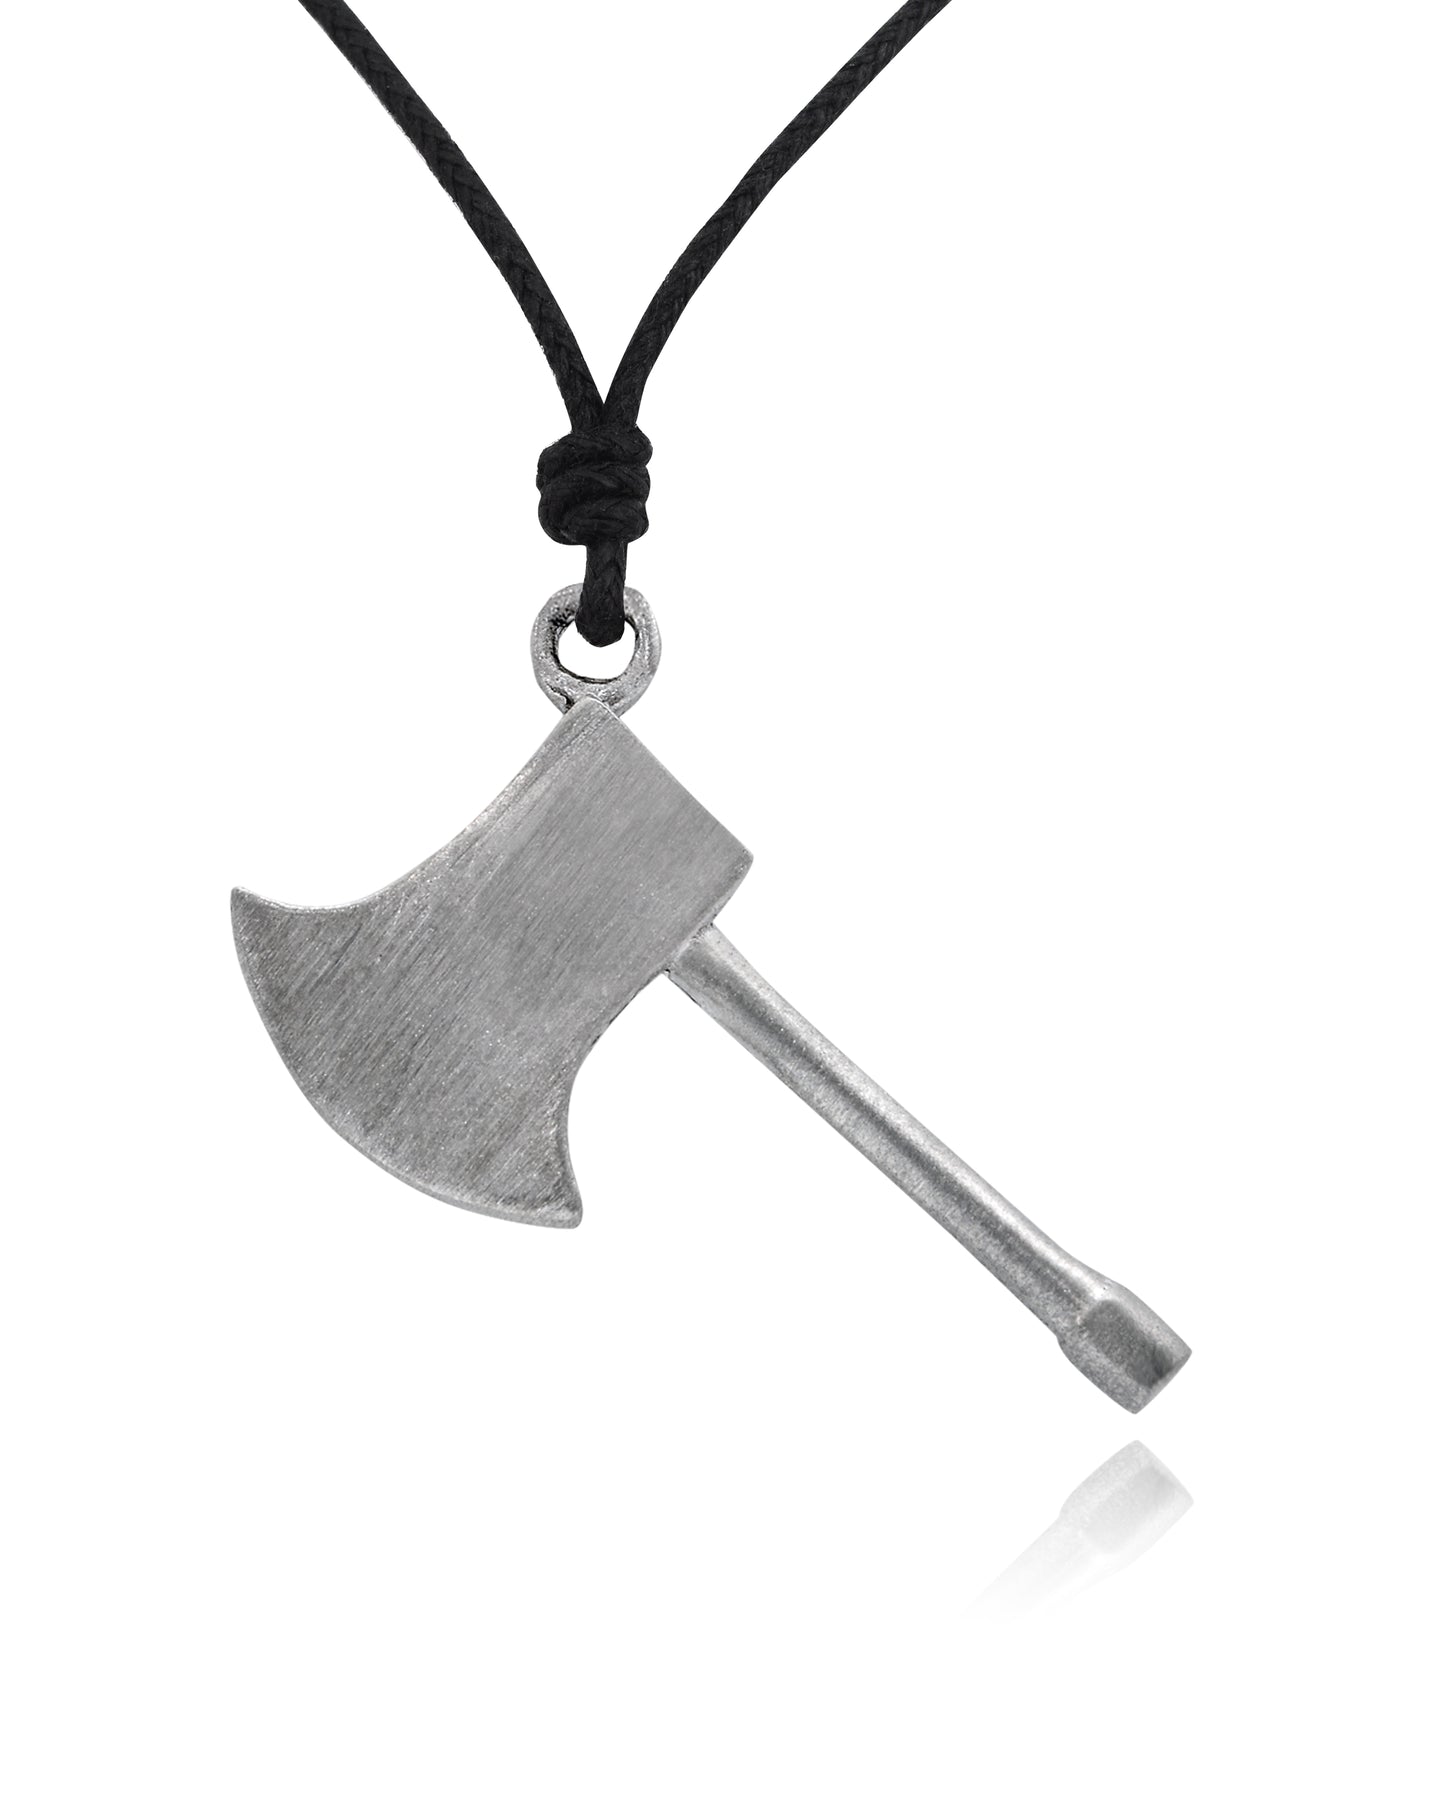 New Battle Axe Silver Pewter Charm Necklace Pendant Jewelry